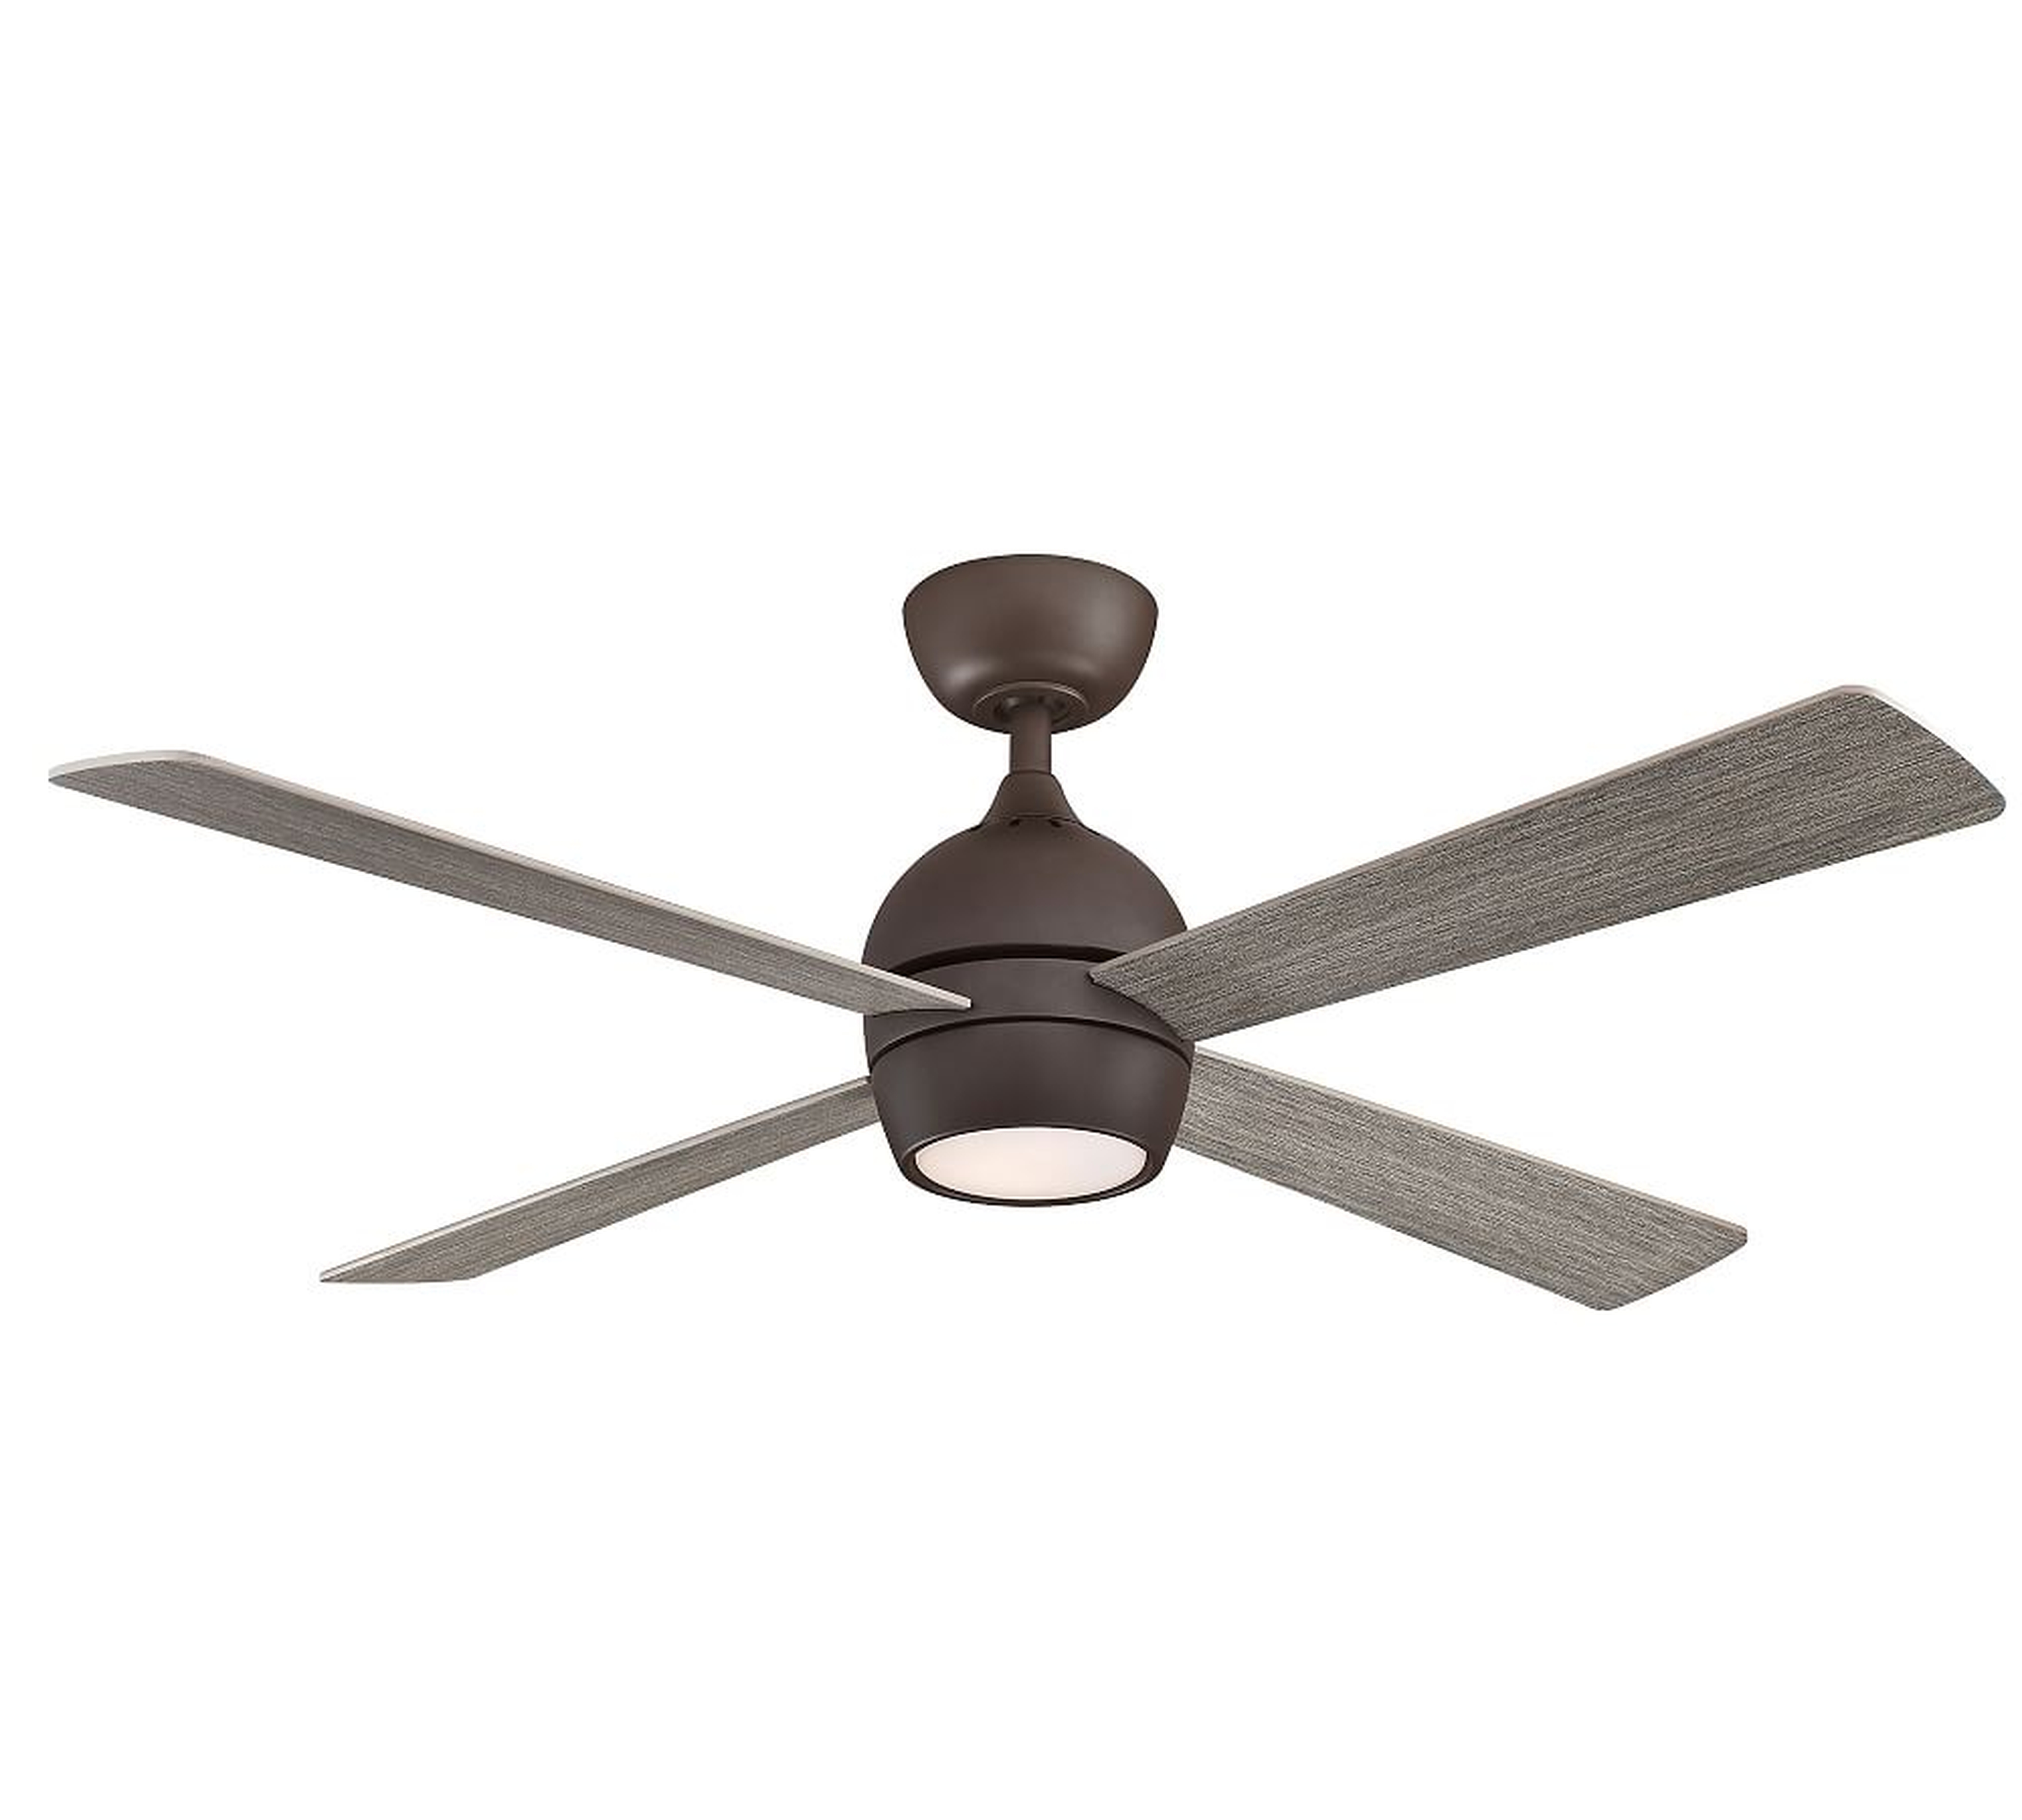 52" Kwad Ceiling Fan, Matte Greige With Weathered Wood Blades - Pottery Barn